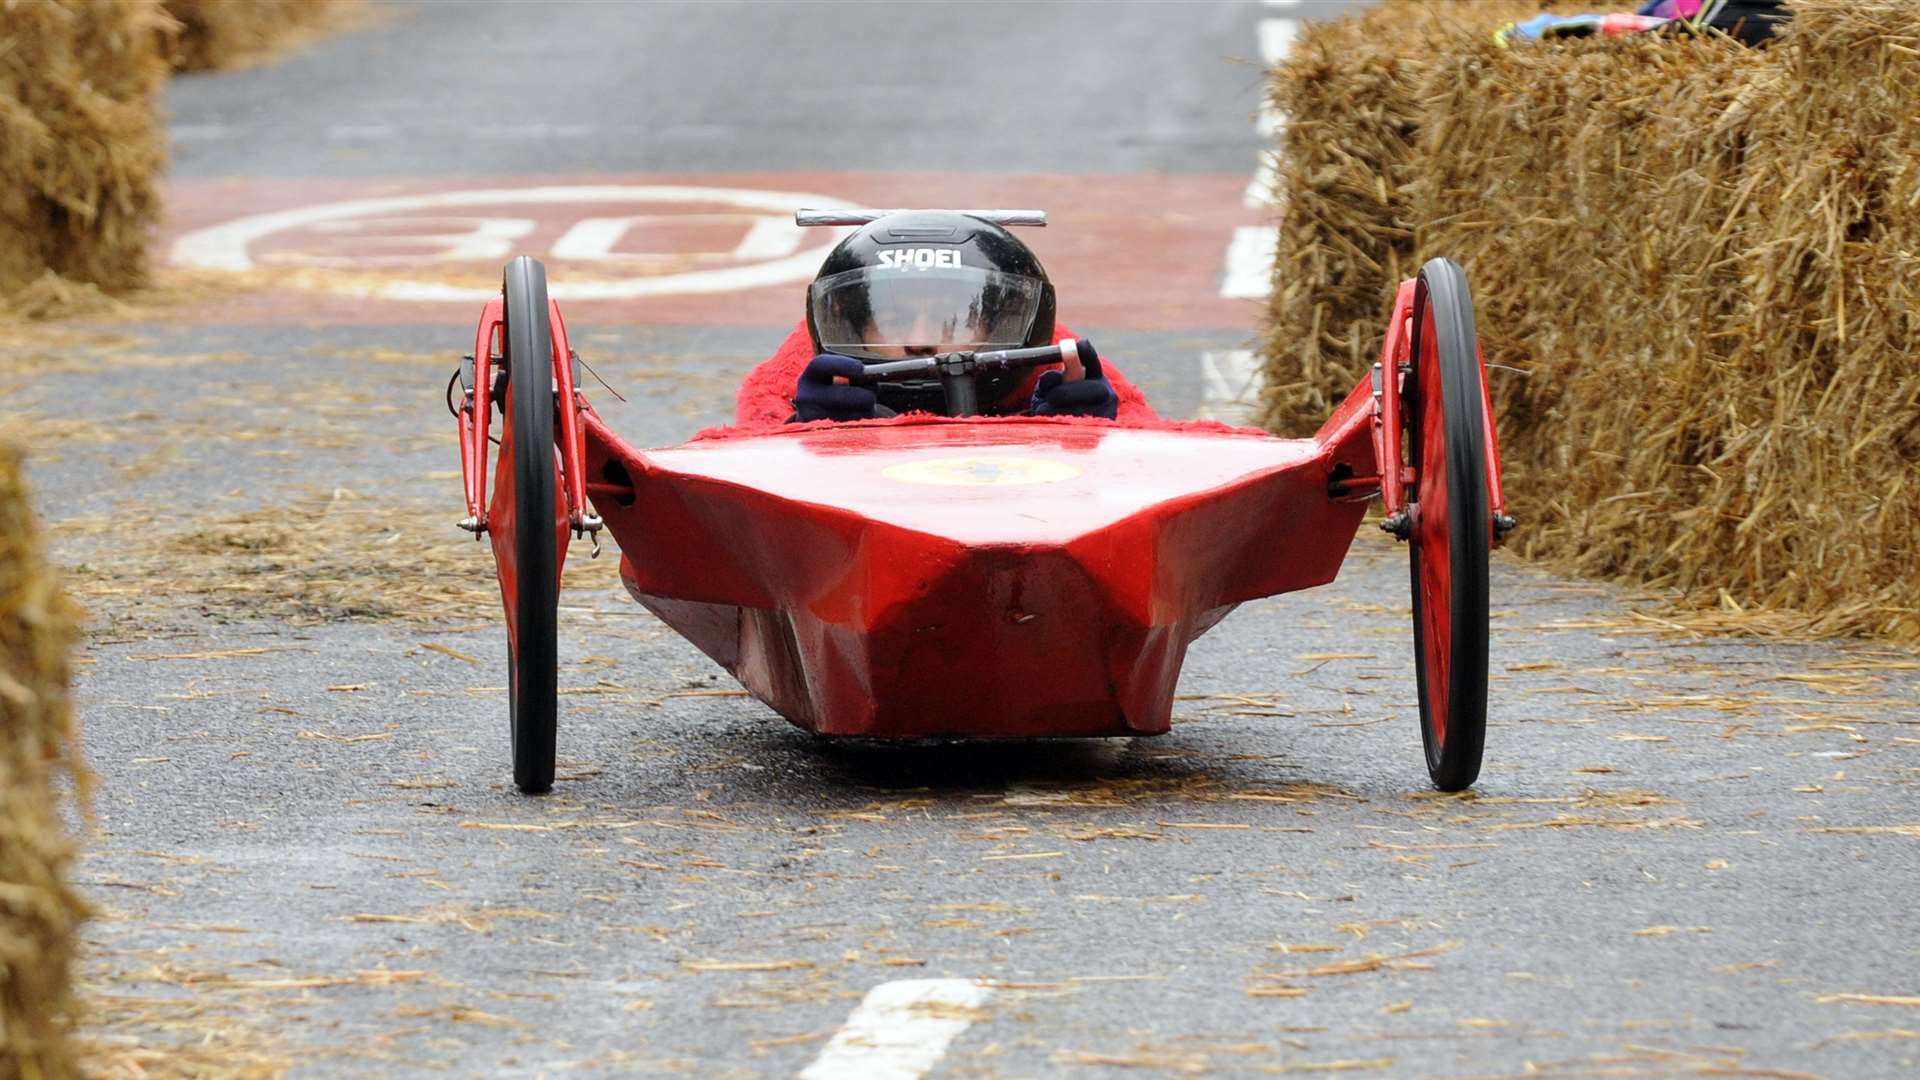 Martin Goodchild’s Little Red Shark was the fastest cart. Picture: Wayne McCabe